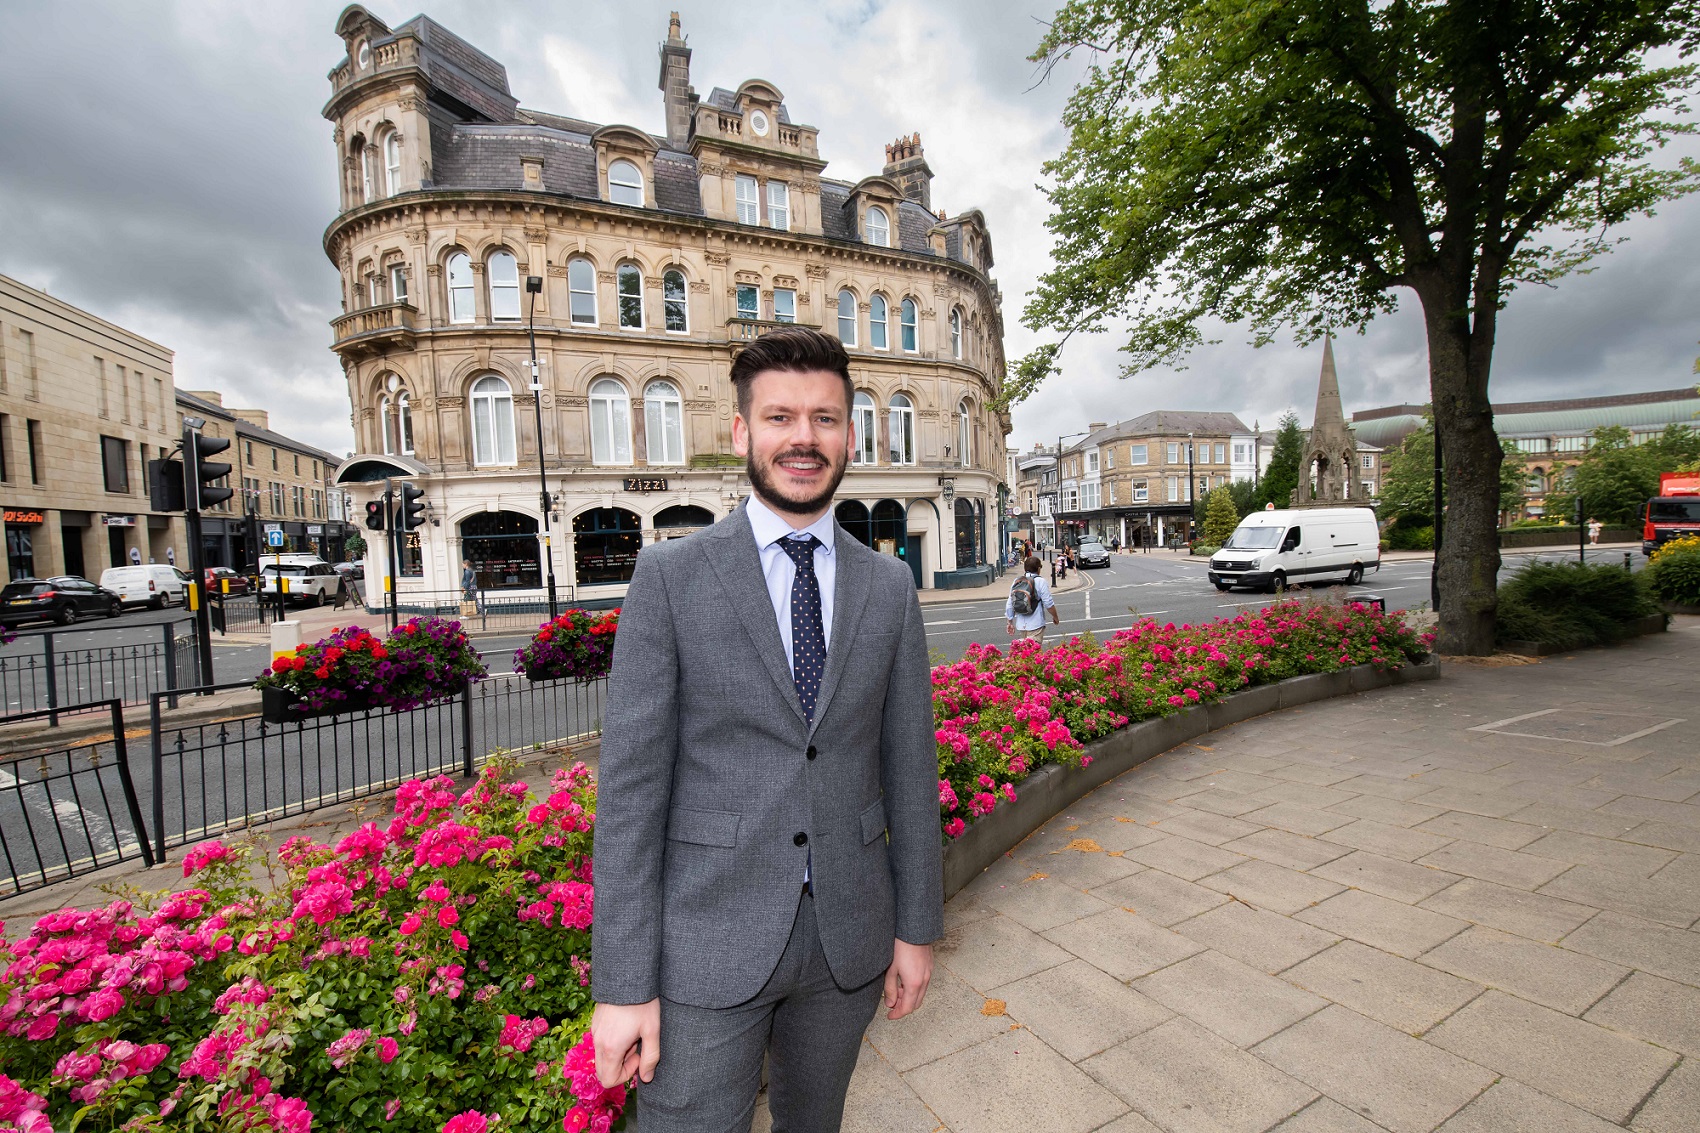 Executive member for highways and transport, Cllr Keane Duncan, in Harrogate town centre. 